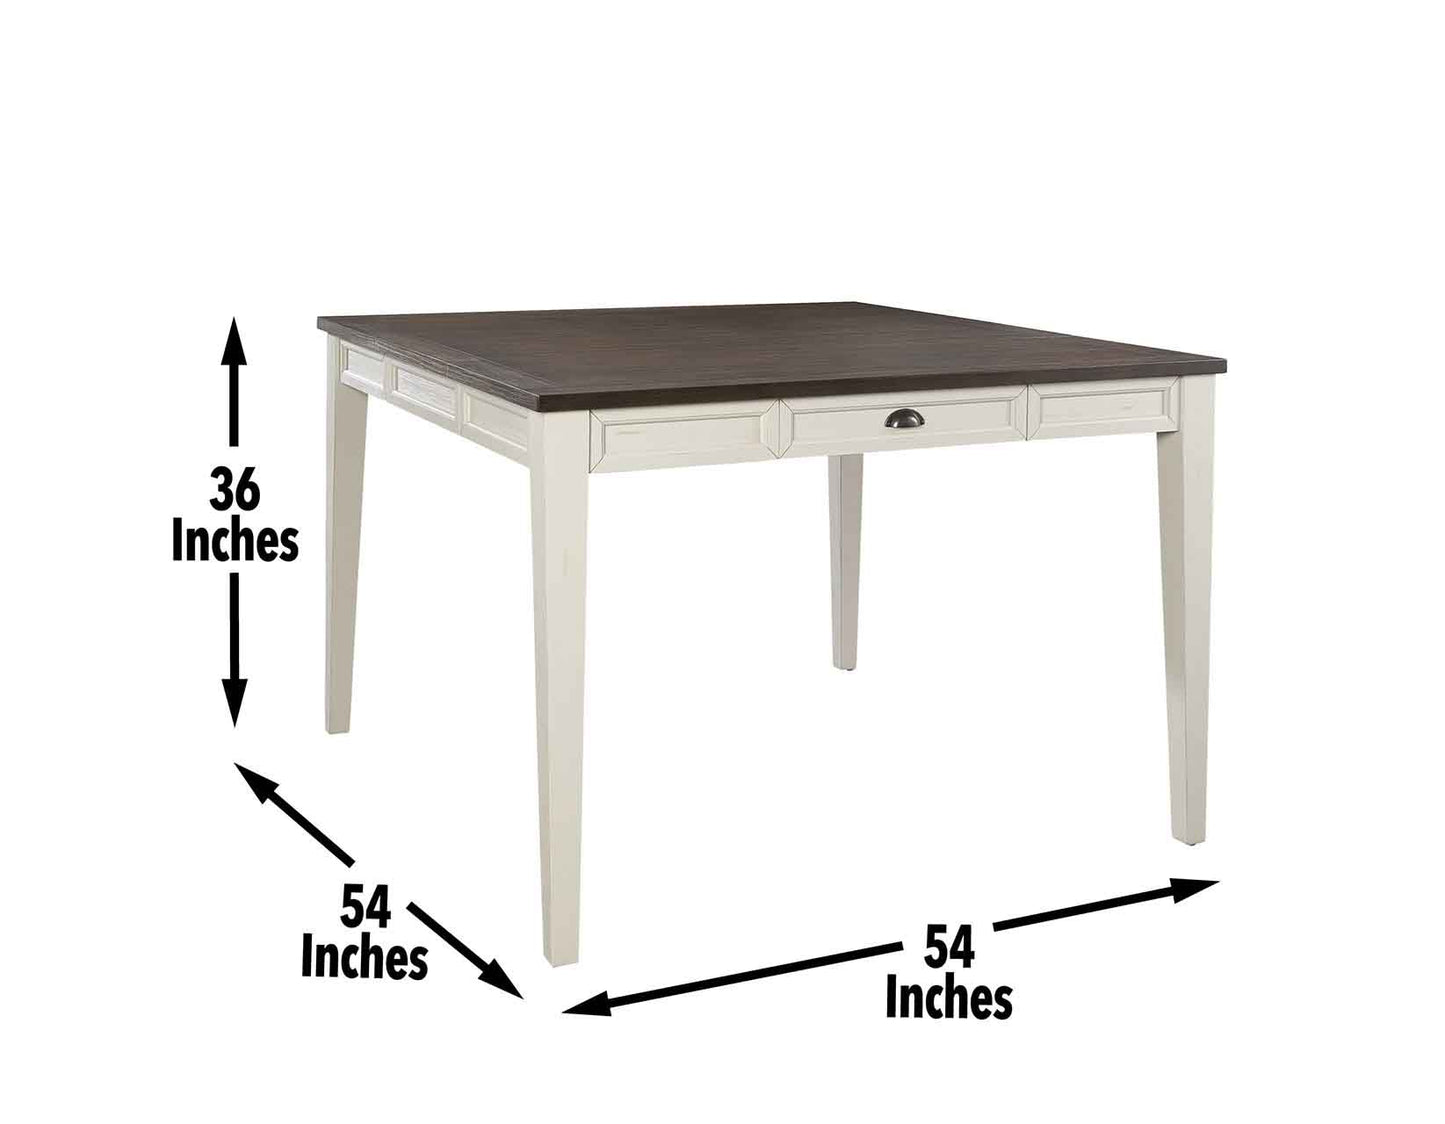 Cayla Counter Height Table by Steve Silver